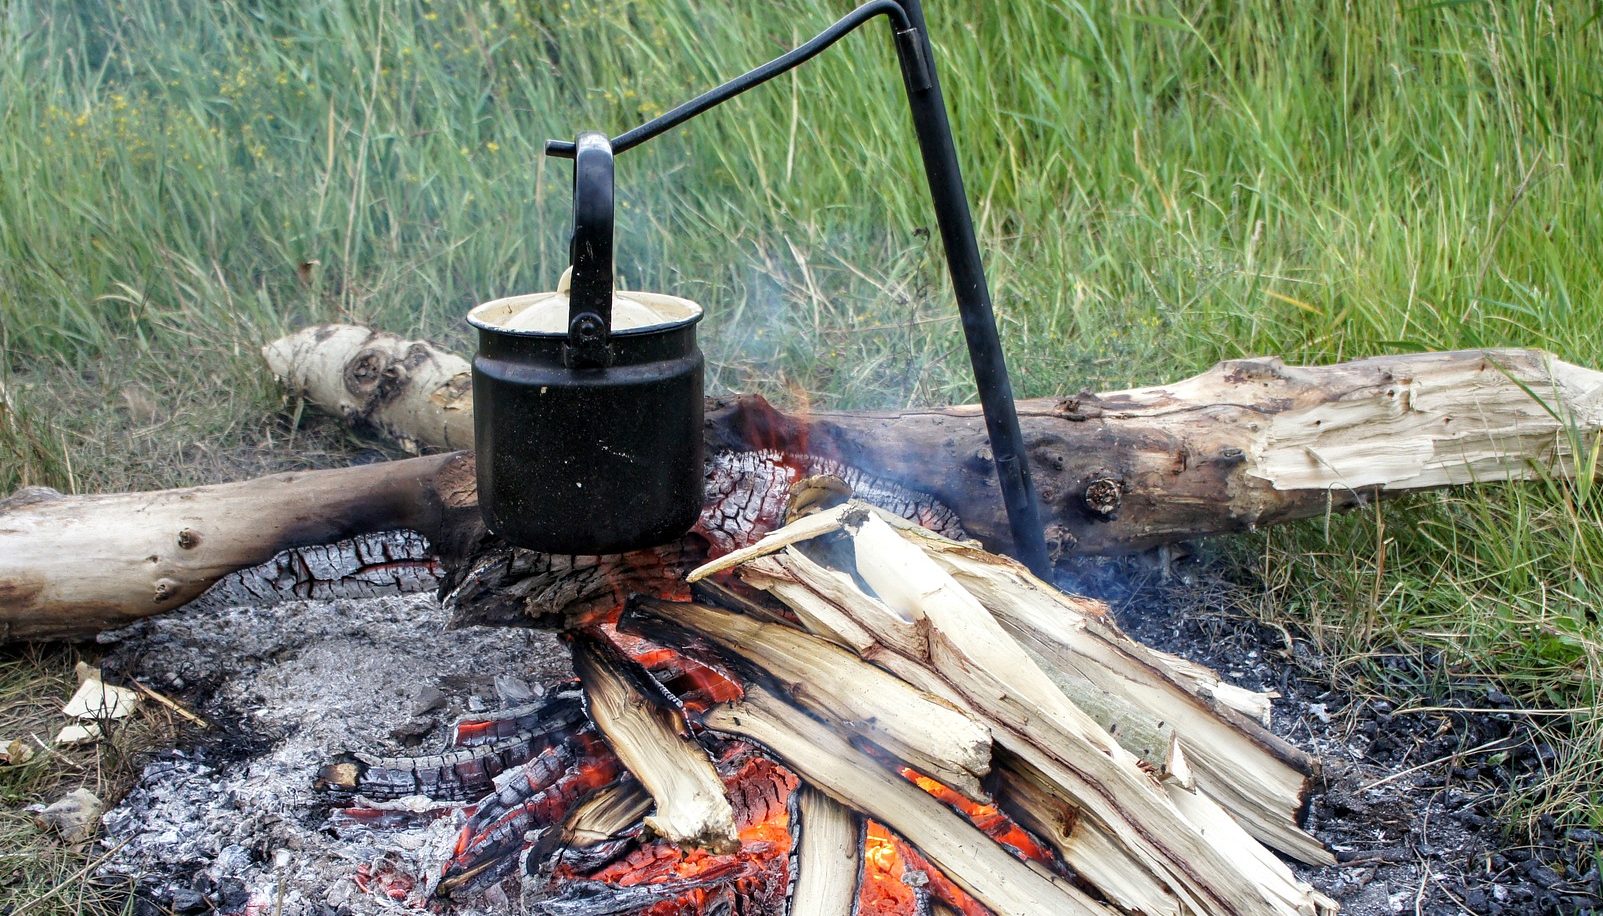 How to boil water to purify when camping